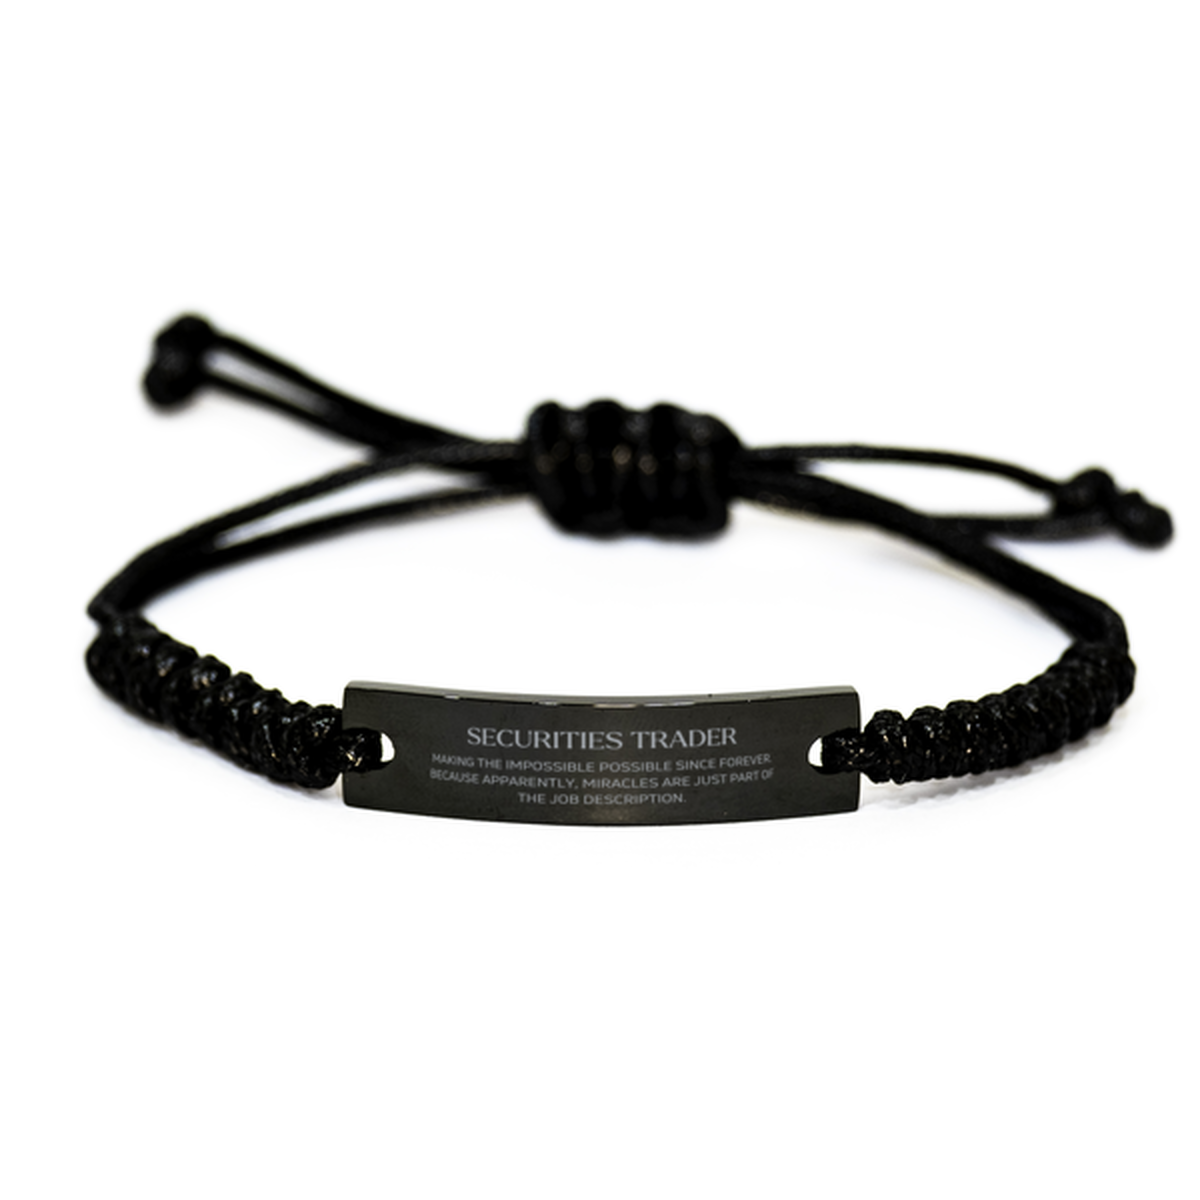 Funny Securities Trader Gifts, Miracles are just part of the job description, Inspirational Birthday Black Rope Bracelet For Securities Trader, Men, Women, Coworkers, Friends, Boss